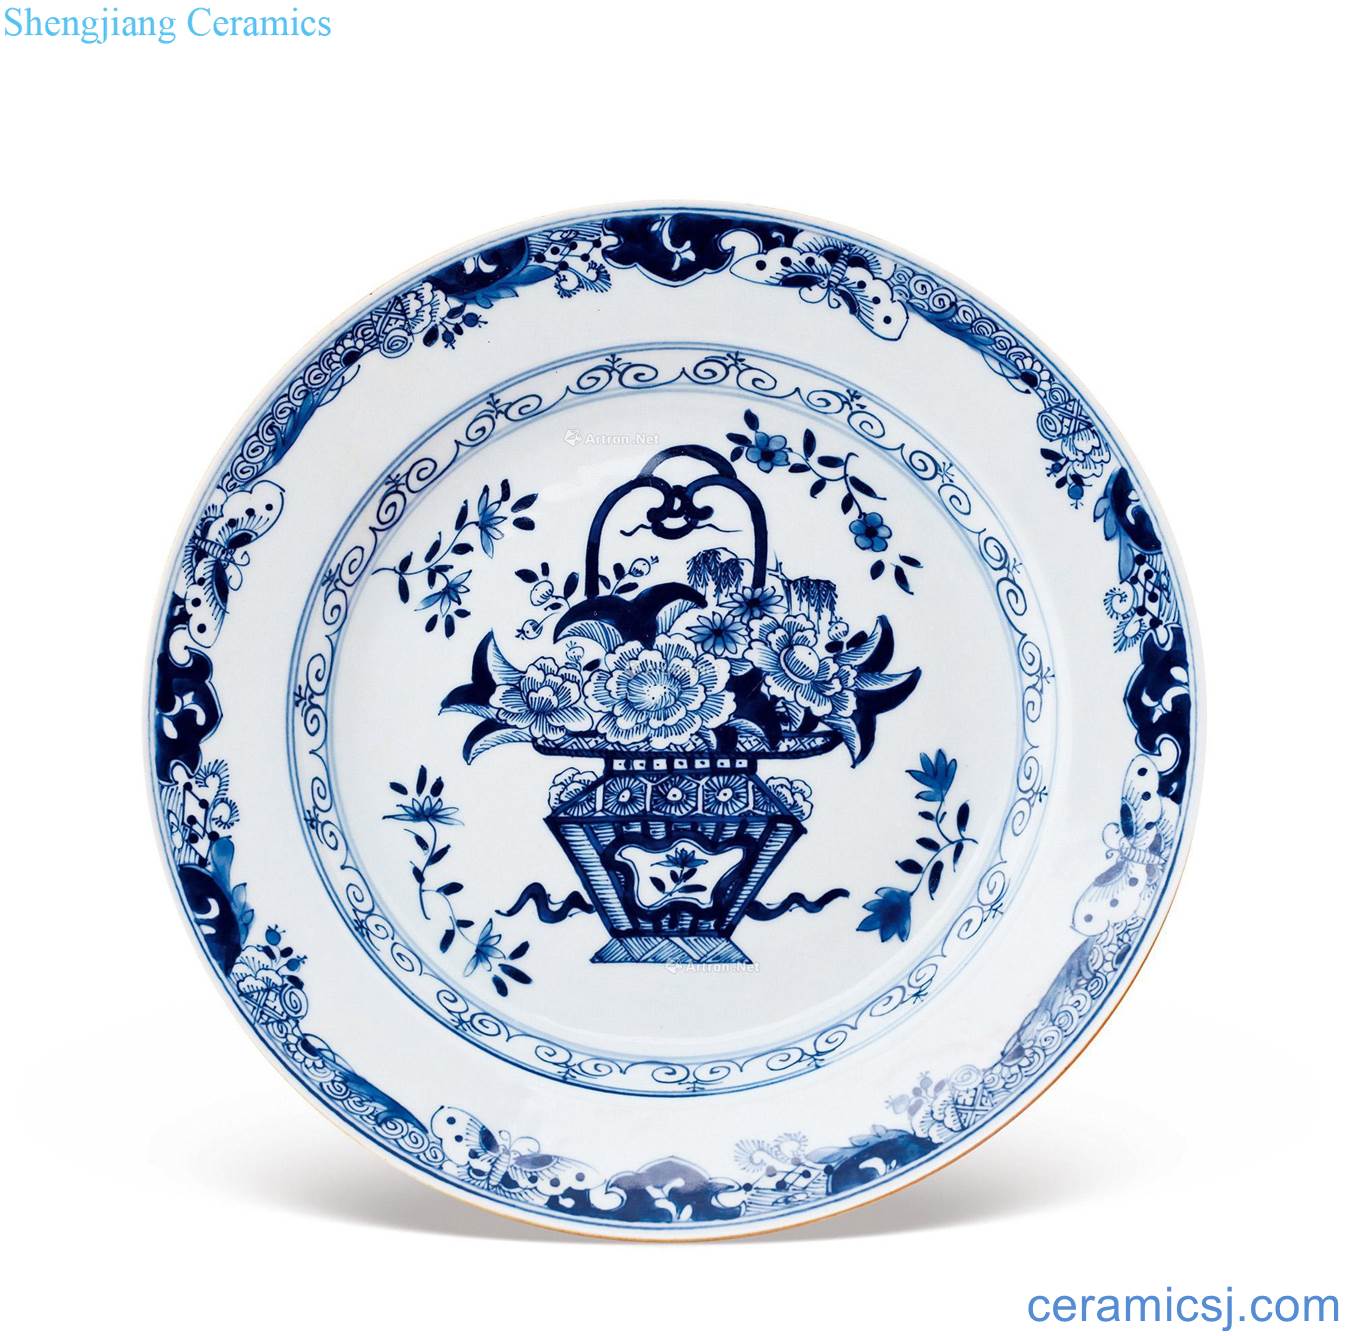 Qing porcelain plate was born in a rich basket